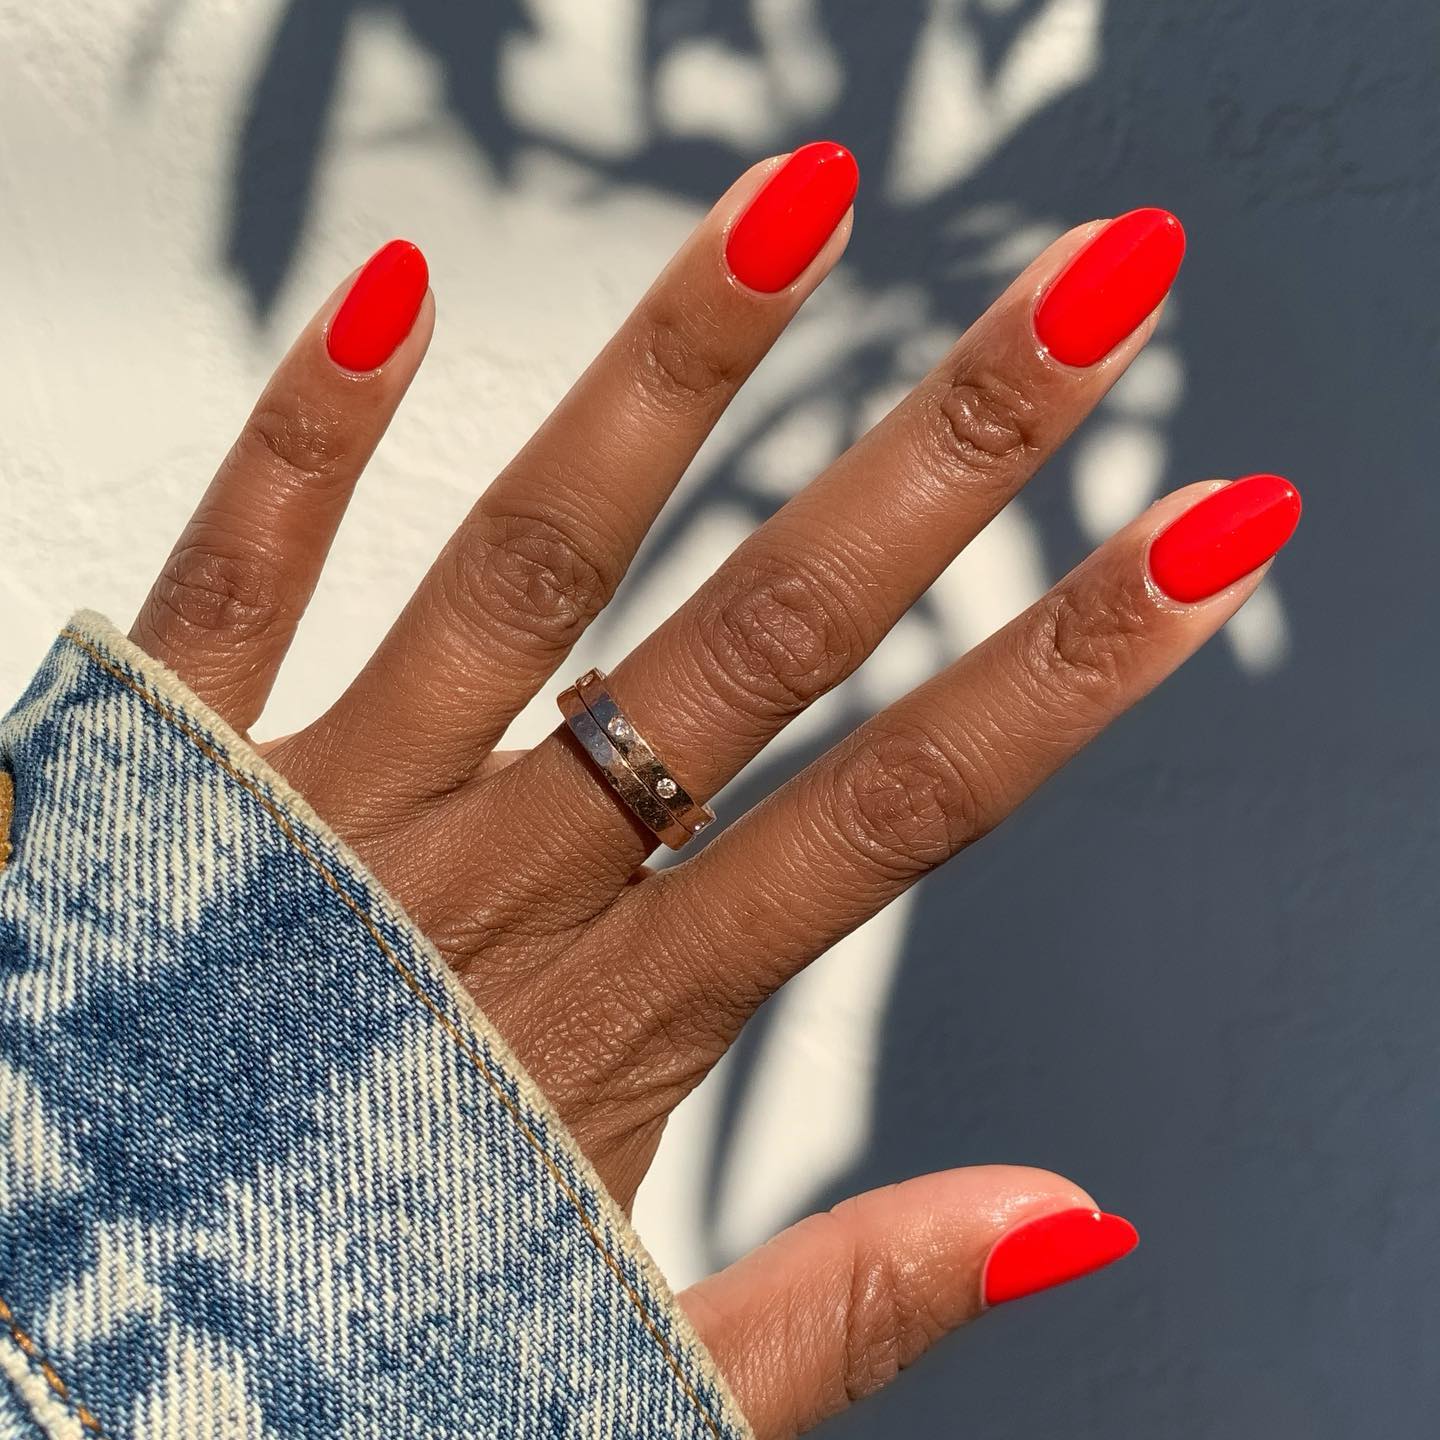 Flattering Neutral Nail Shades For Deeper Skin Tones | SheerLuxe